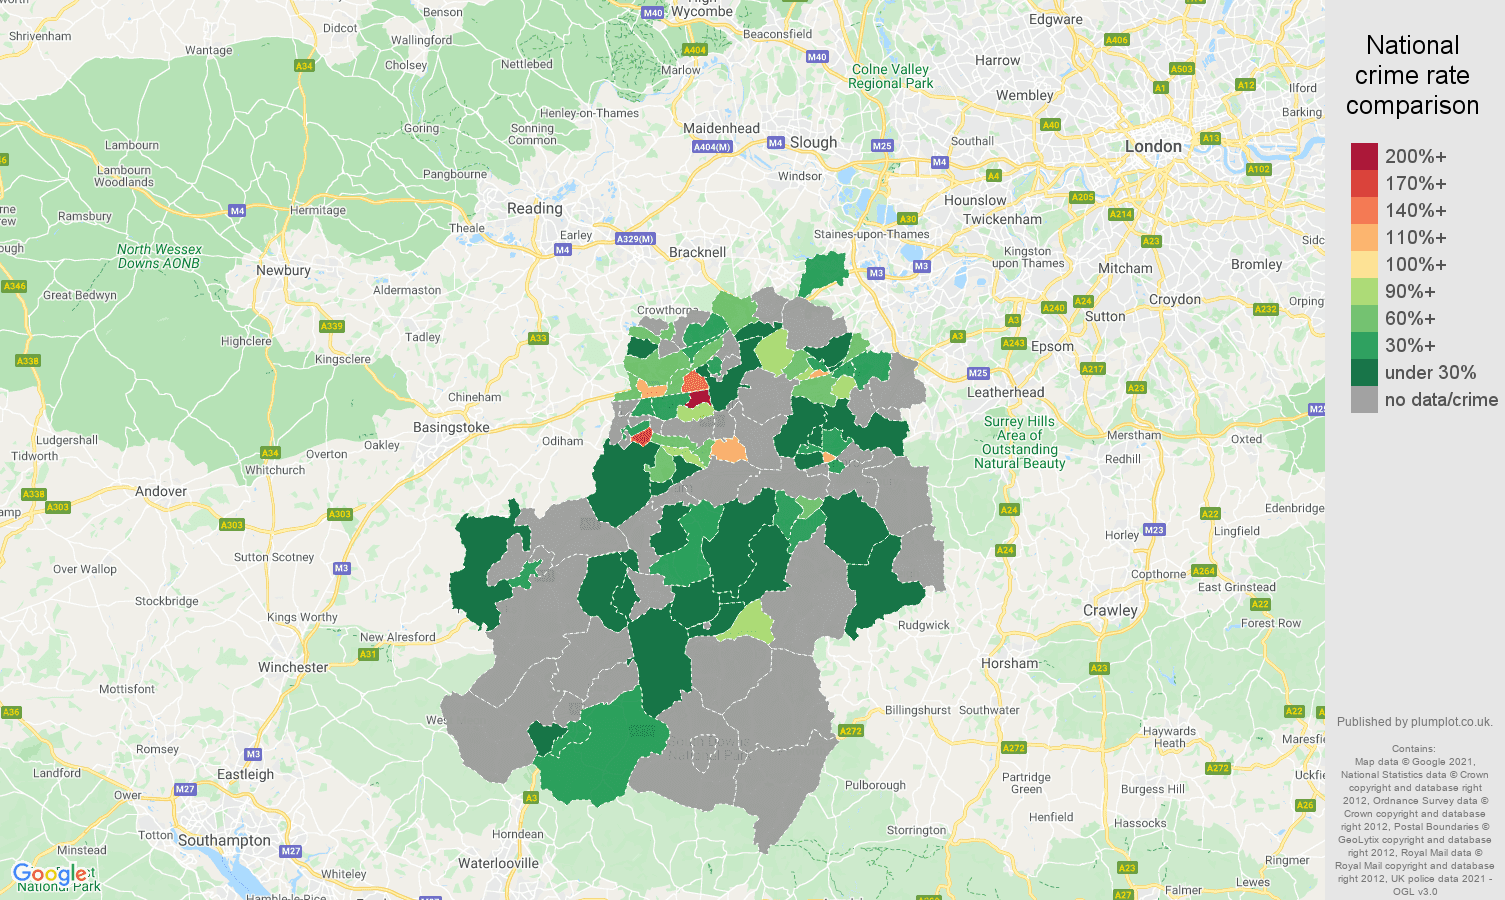 Guildford robbery crime rate comparison map